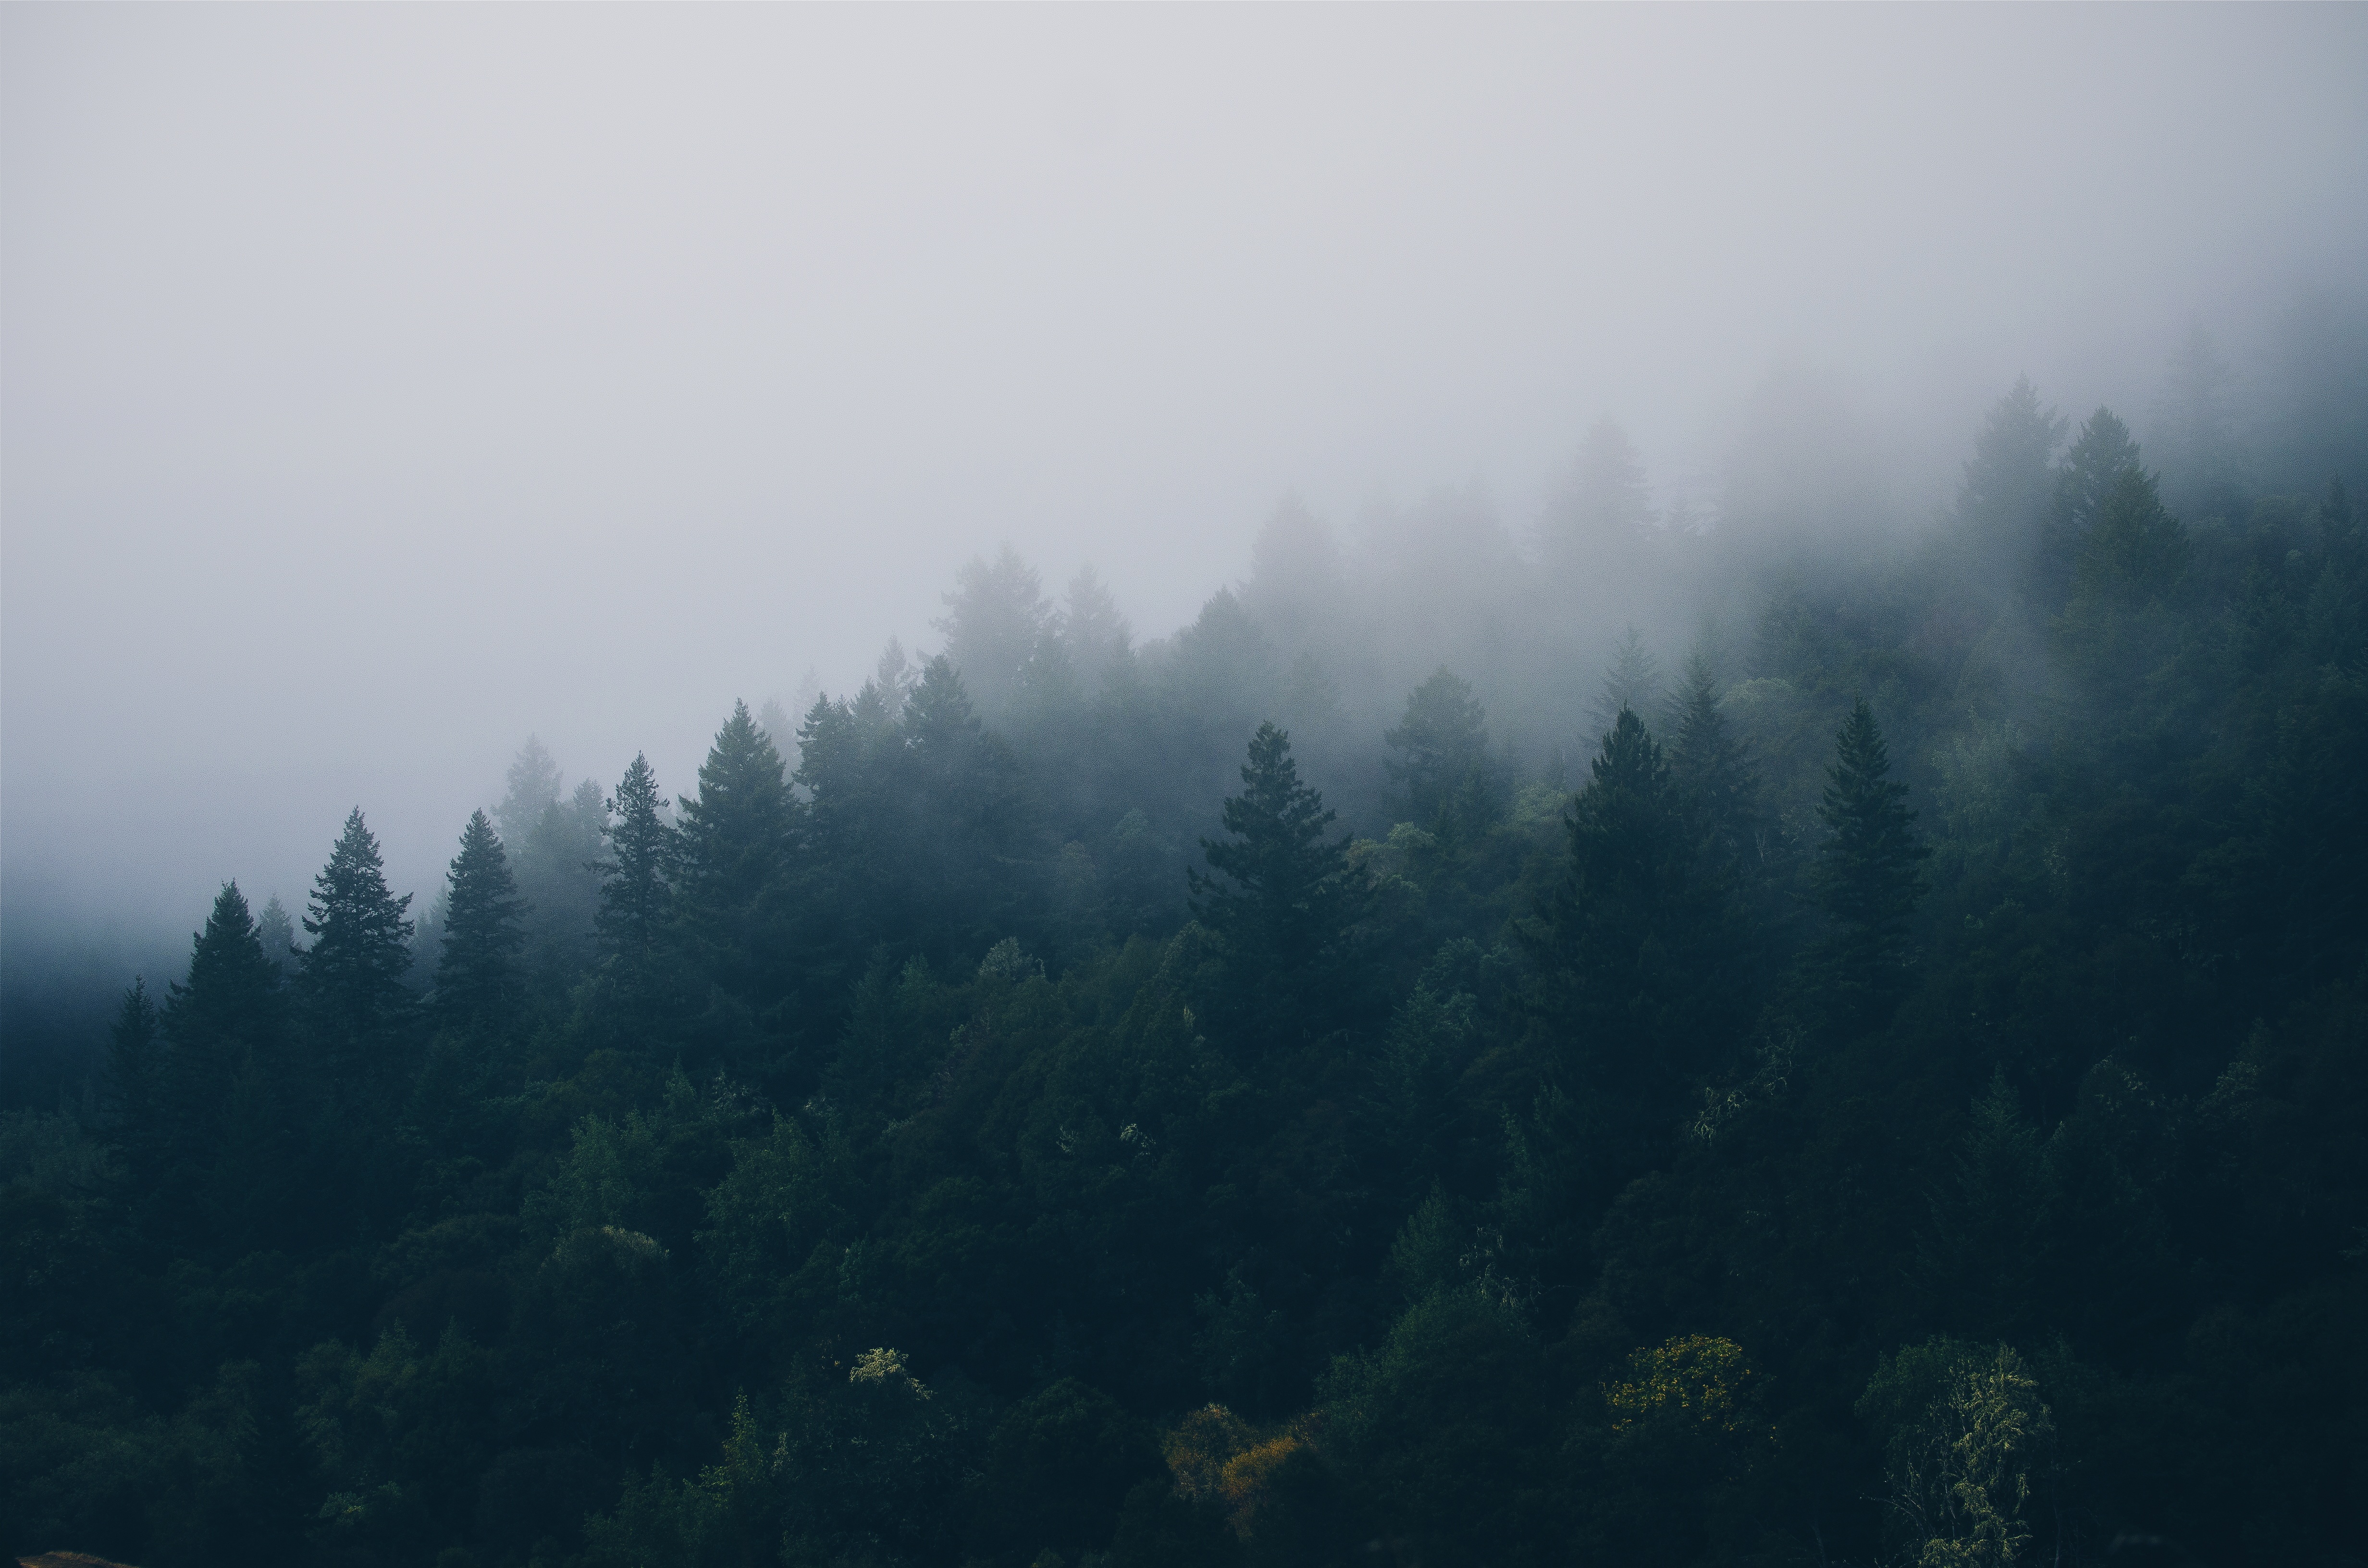 101772 download wallpaper trees, nature, forest, fog screensavers and pictures for free